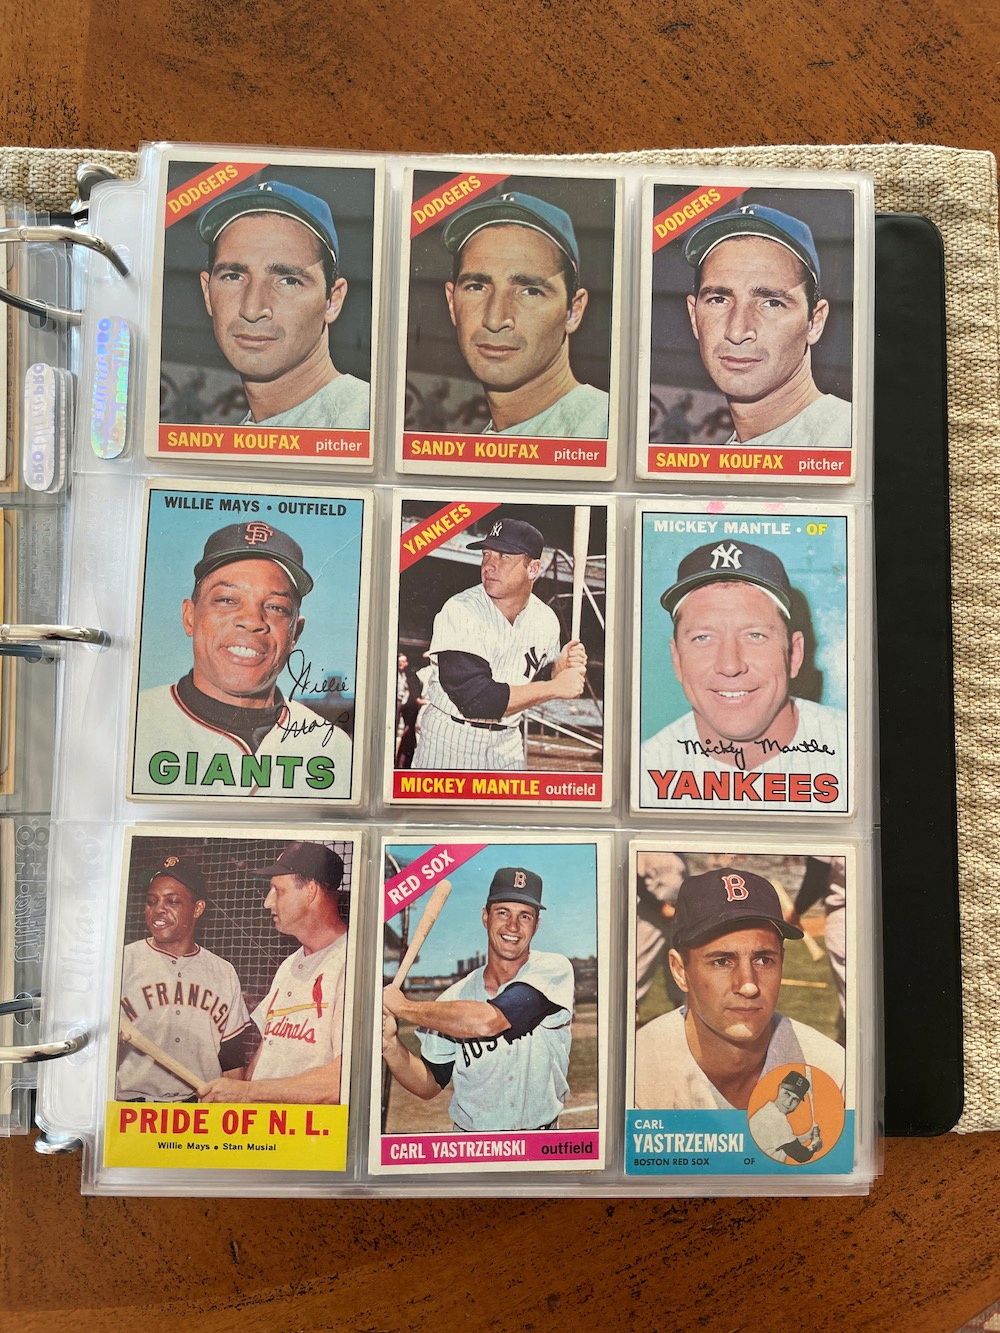 Top 19 Most Valuable Sandy Koufax Baseball Cards